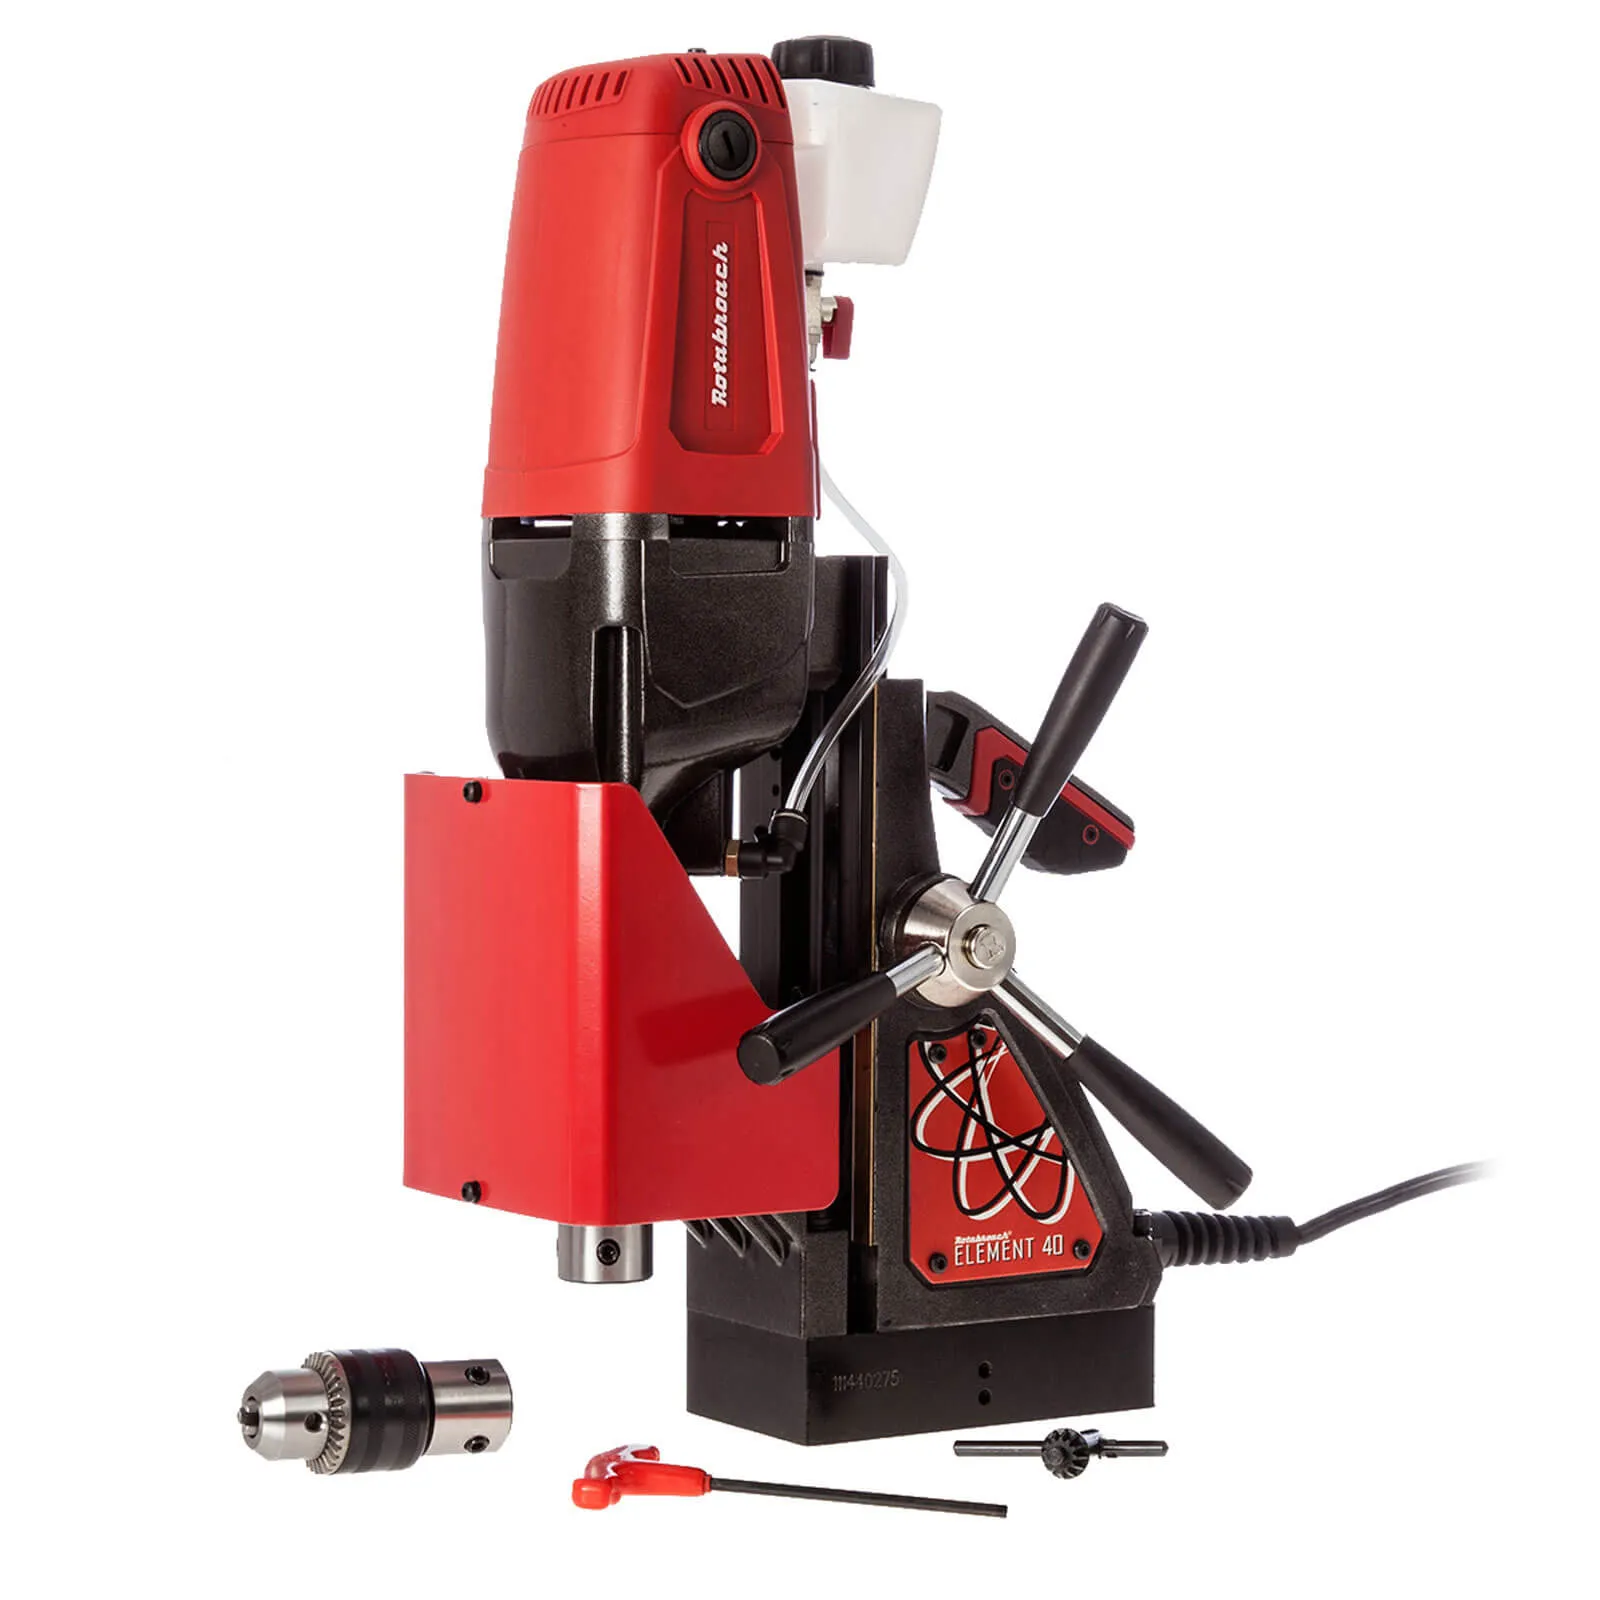 Rotabroach Element 40 Magnetic Drilling Machine - 240v